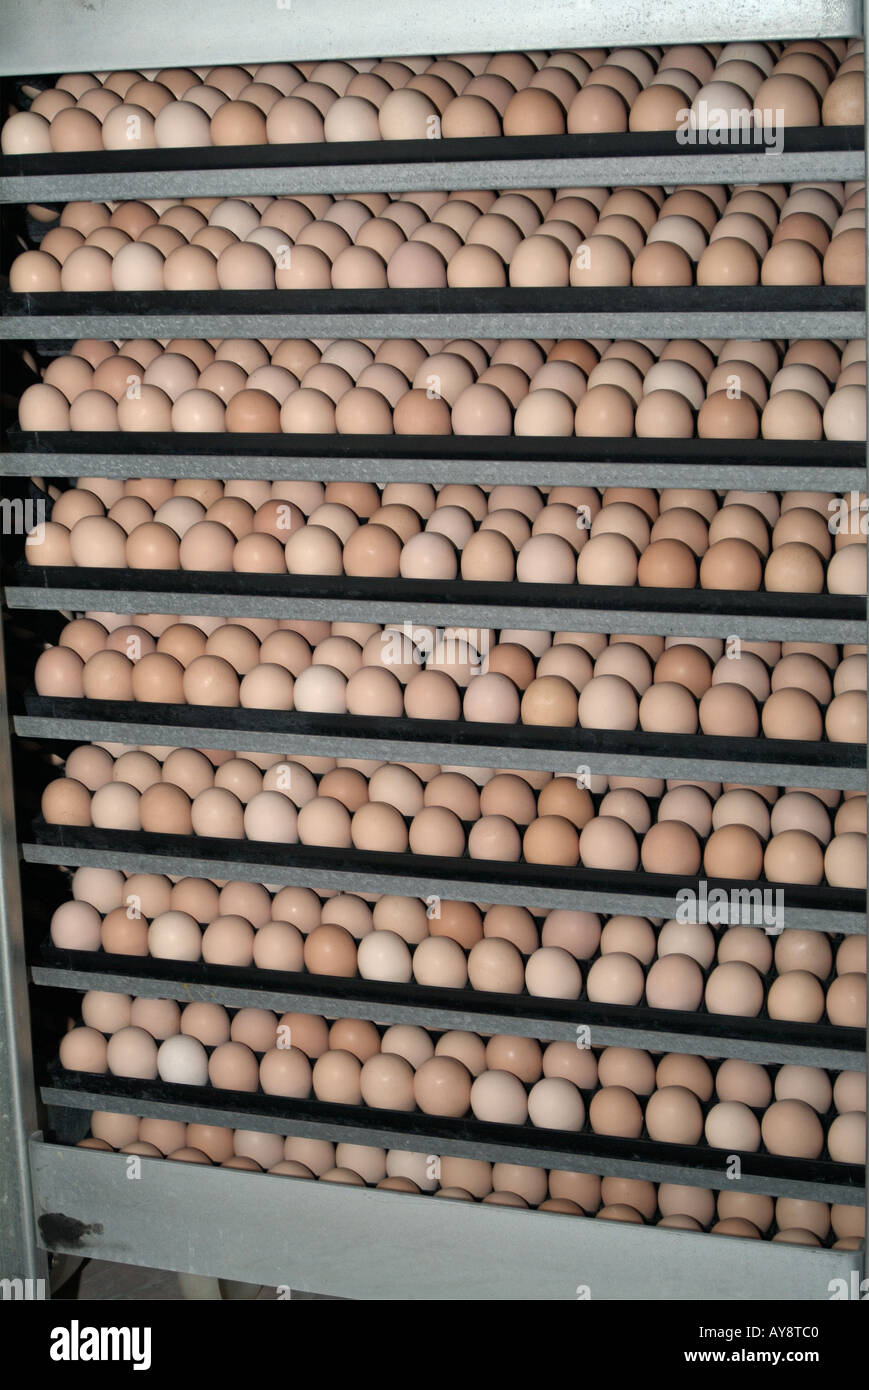 Inside of an Egg Incubator in the Hatchery of a Commercial Poultry Farm Stock Photo